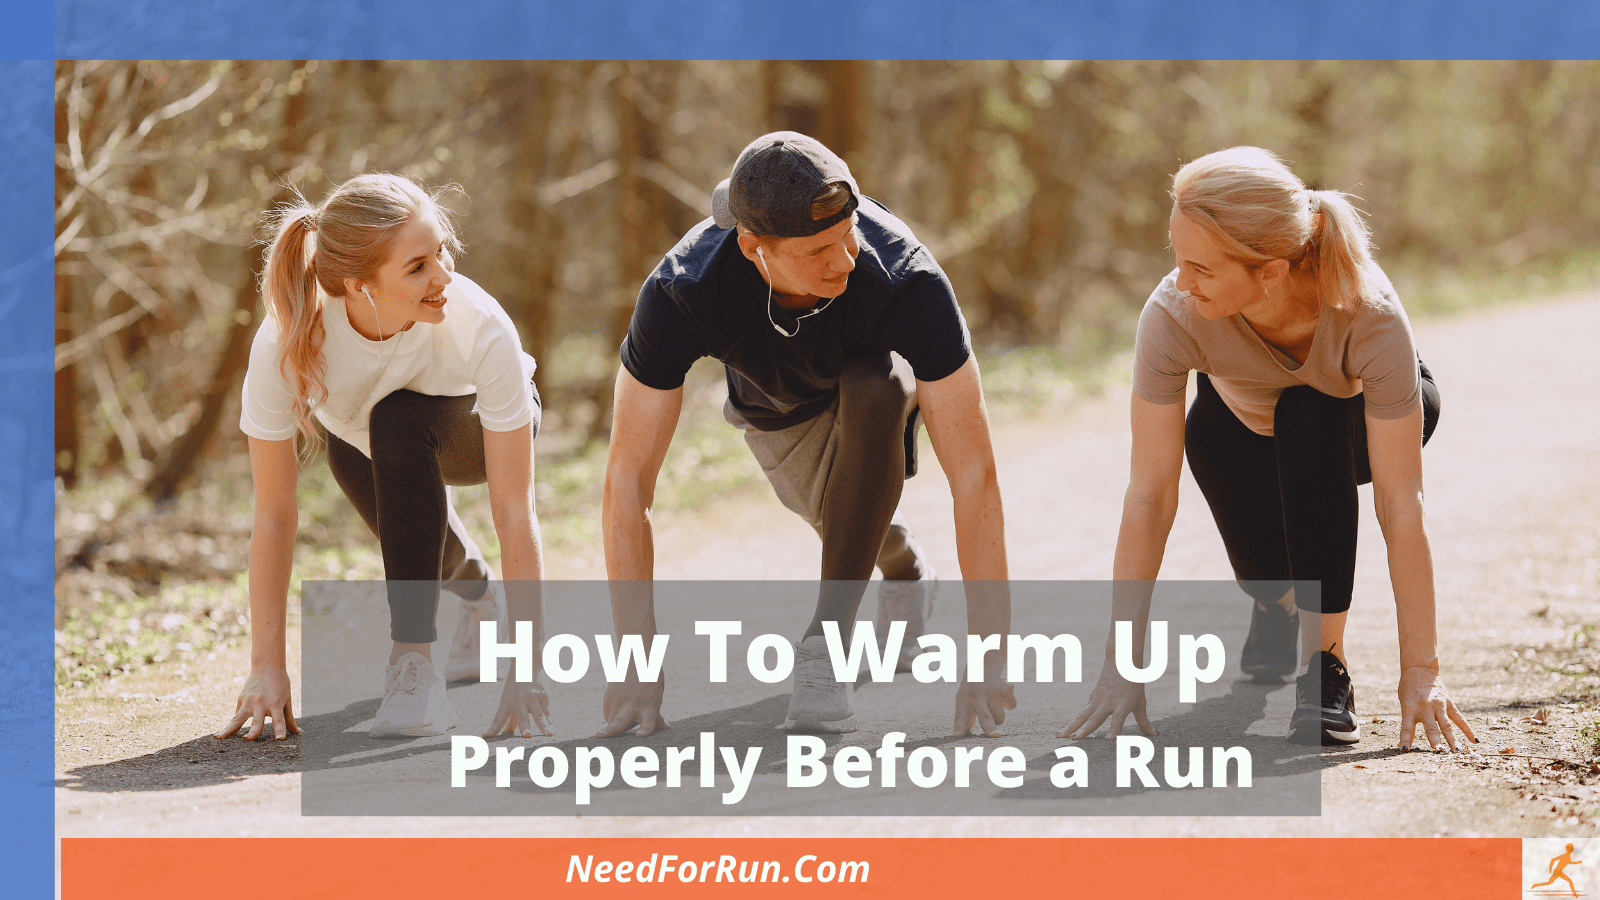 How To Warm Up Properly Before a Run In 3 Steps to Avoid Running Injuries and Improve Your Running Performance